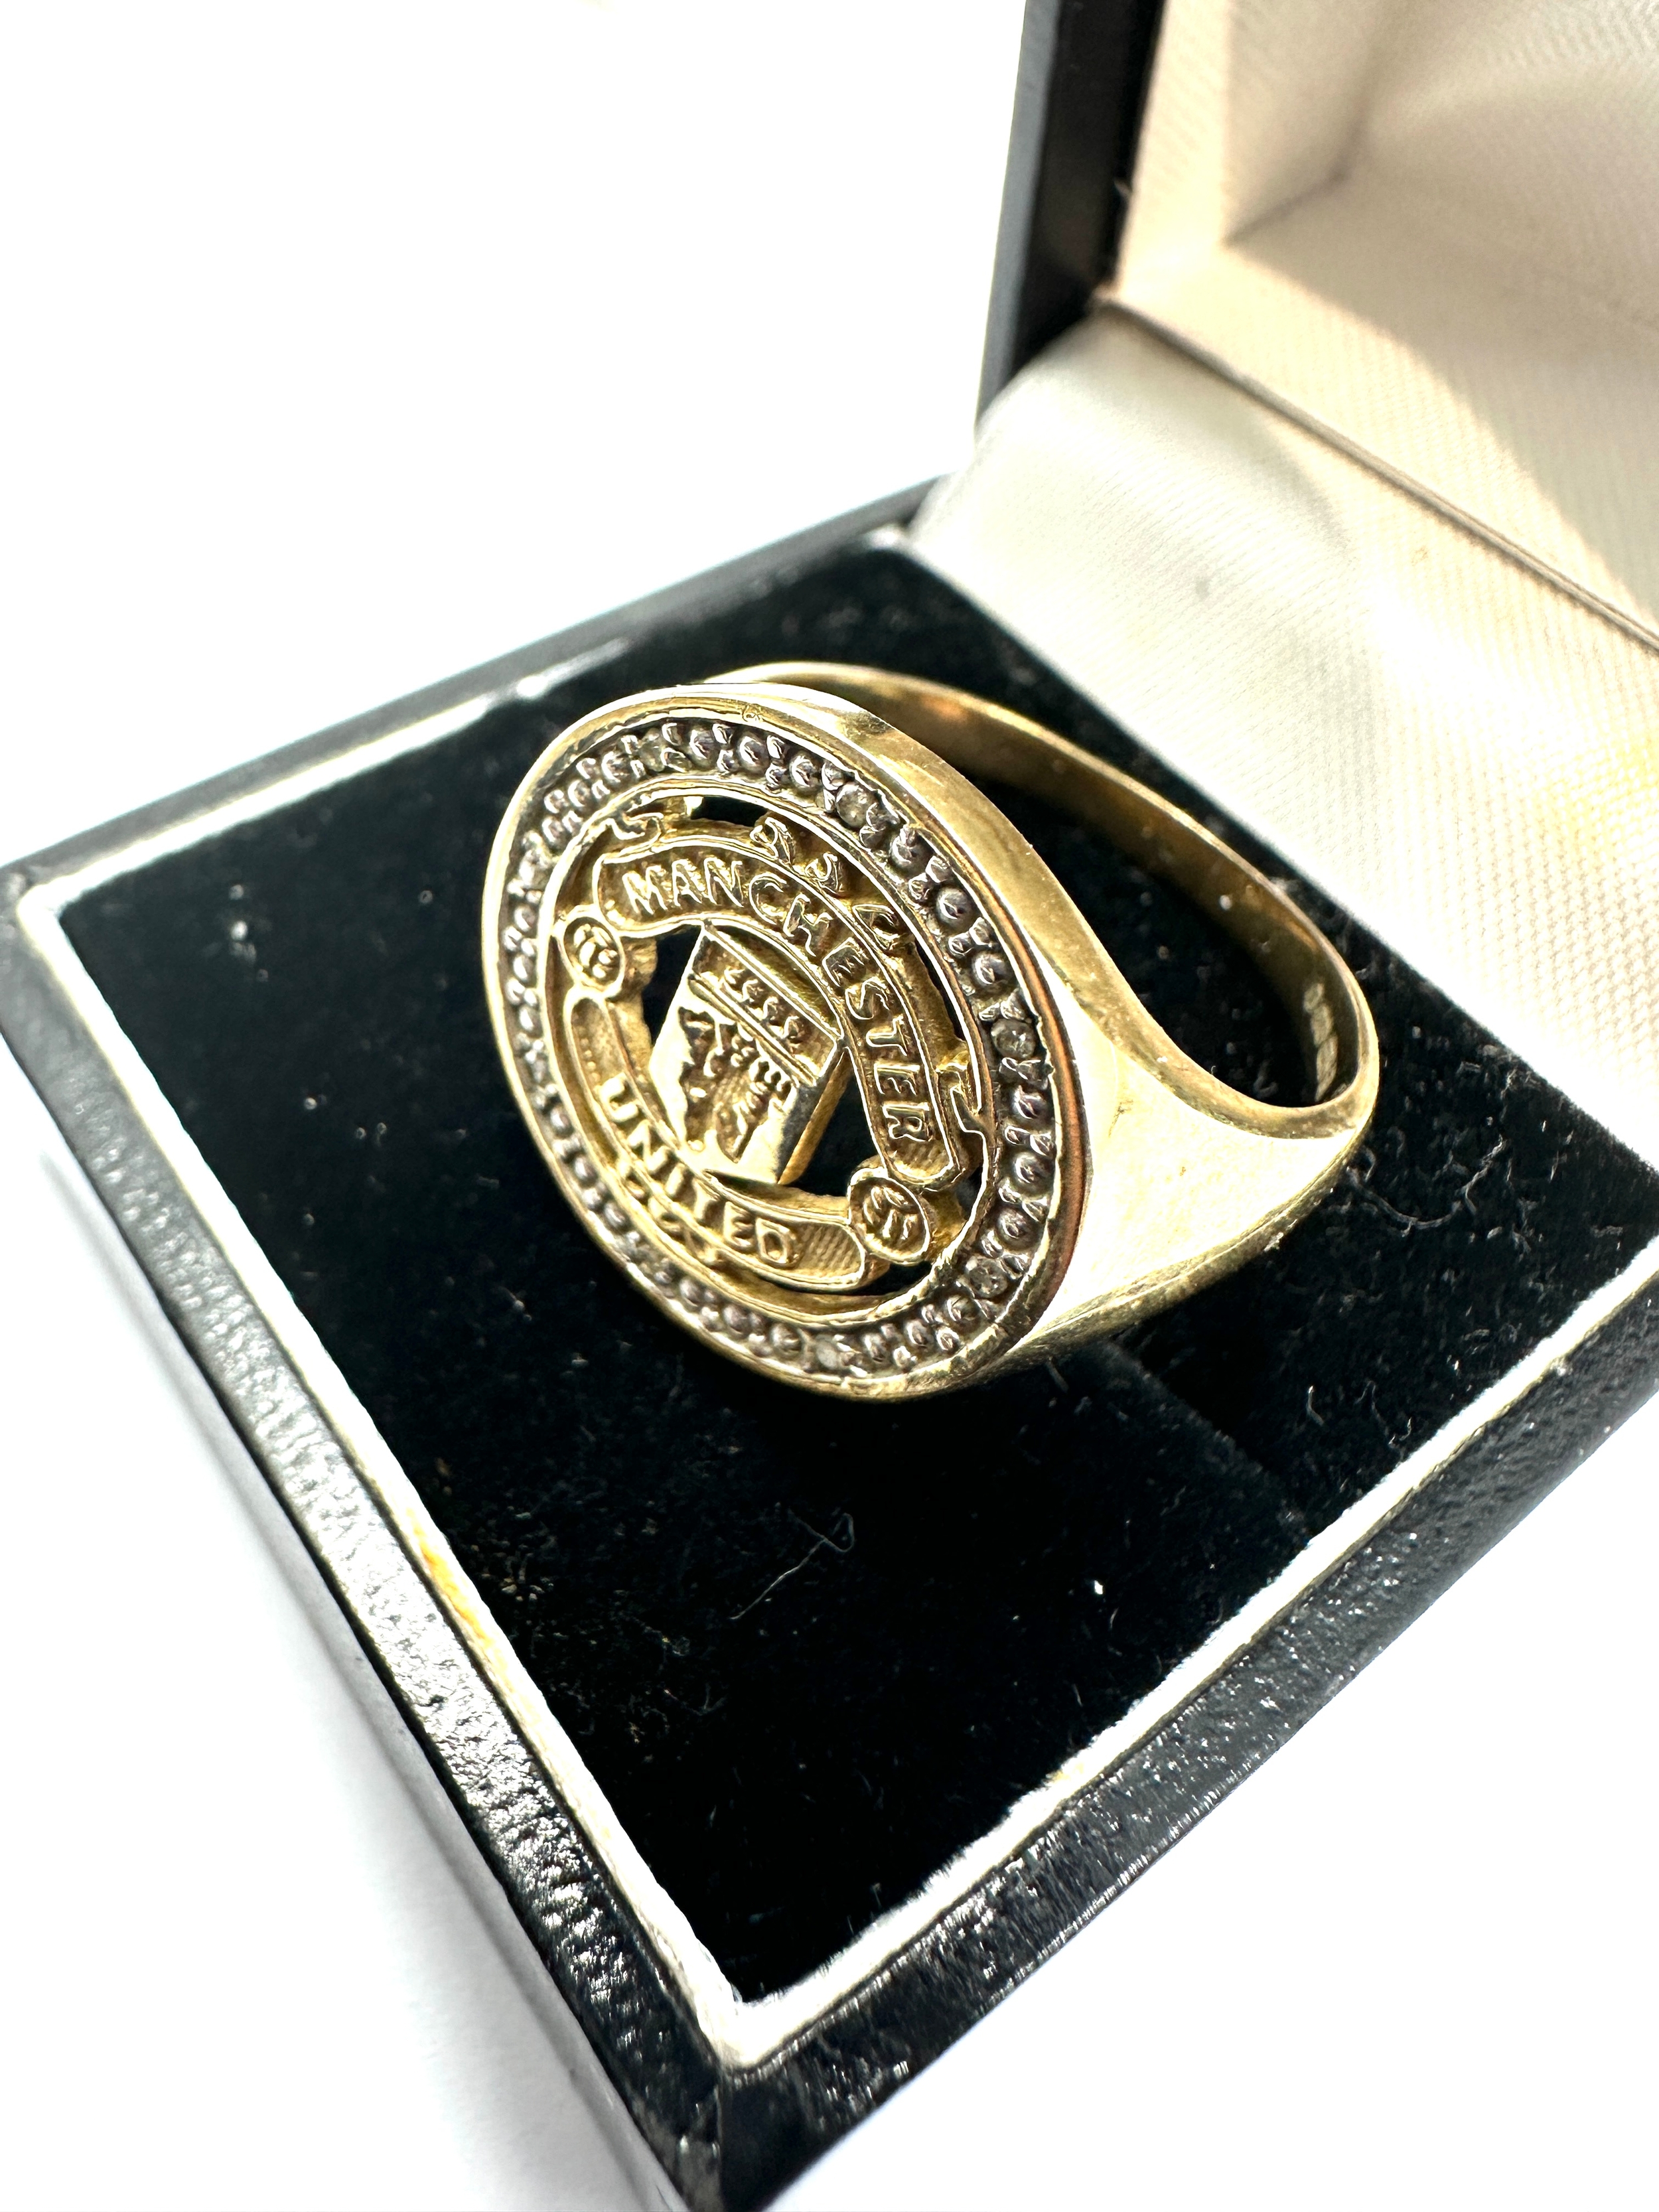 Boxed manchester united 9ct gold & diamond ring weight 5.6g - Image 3 of 5